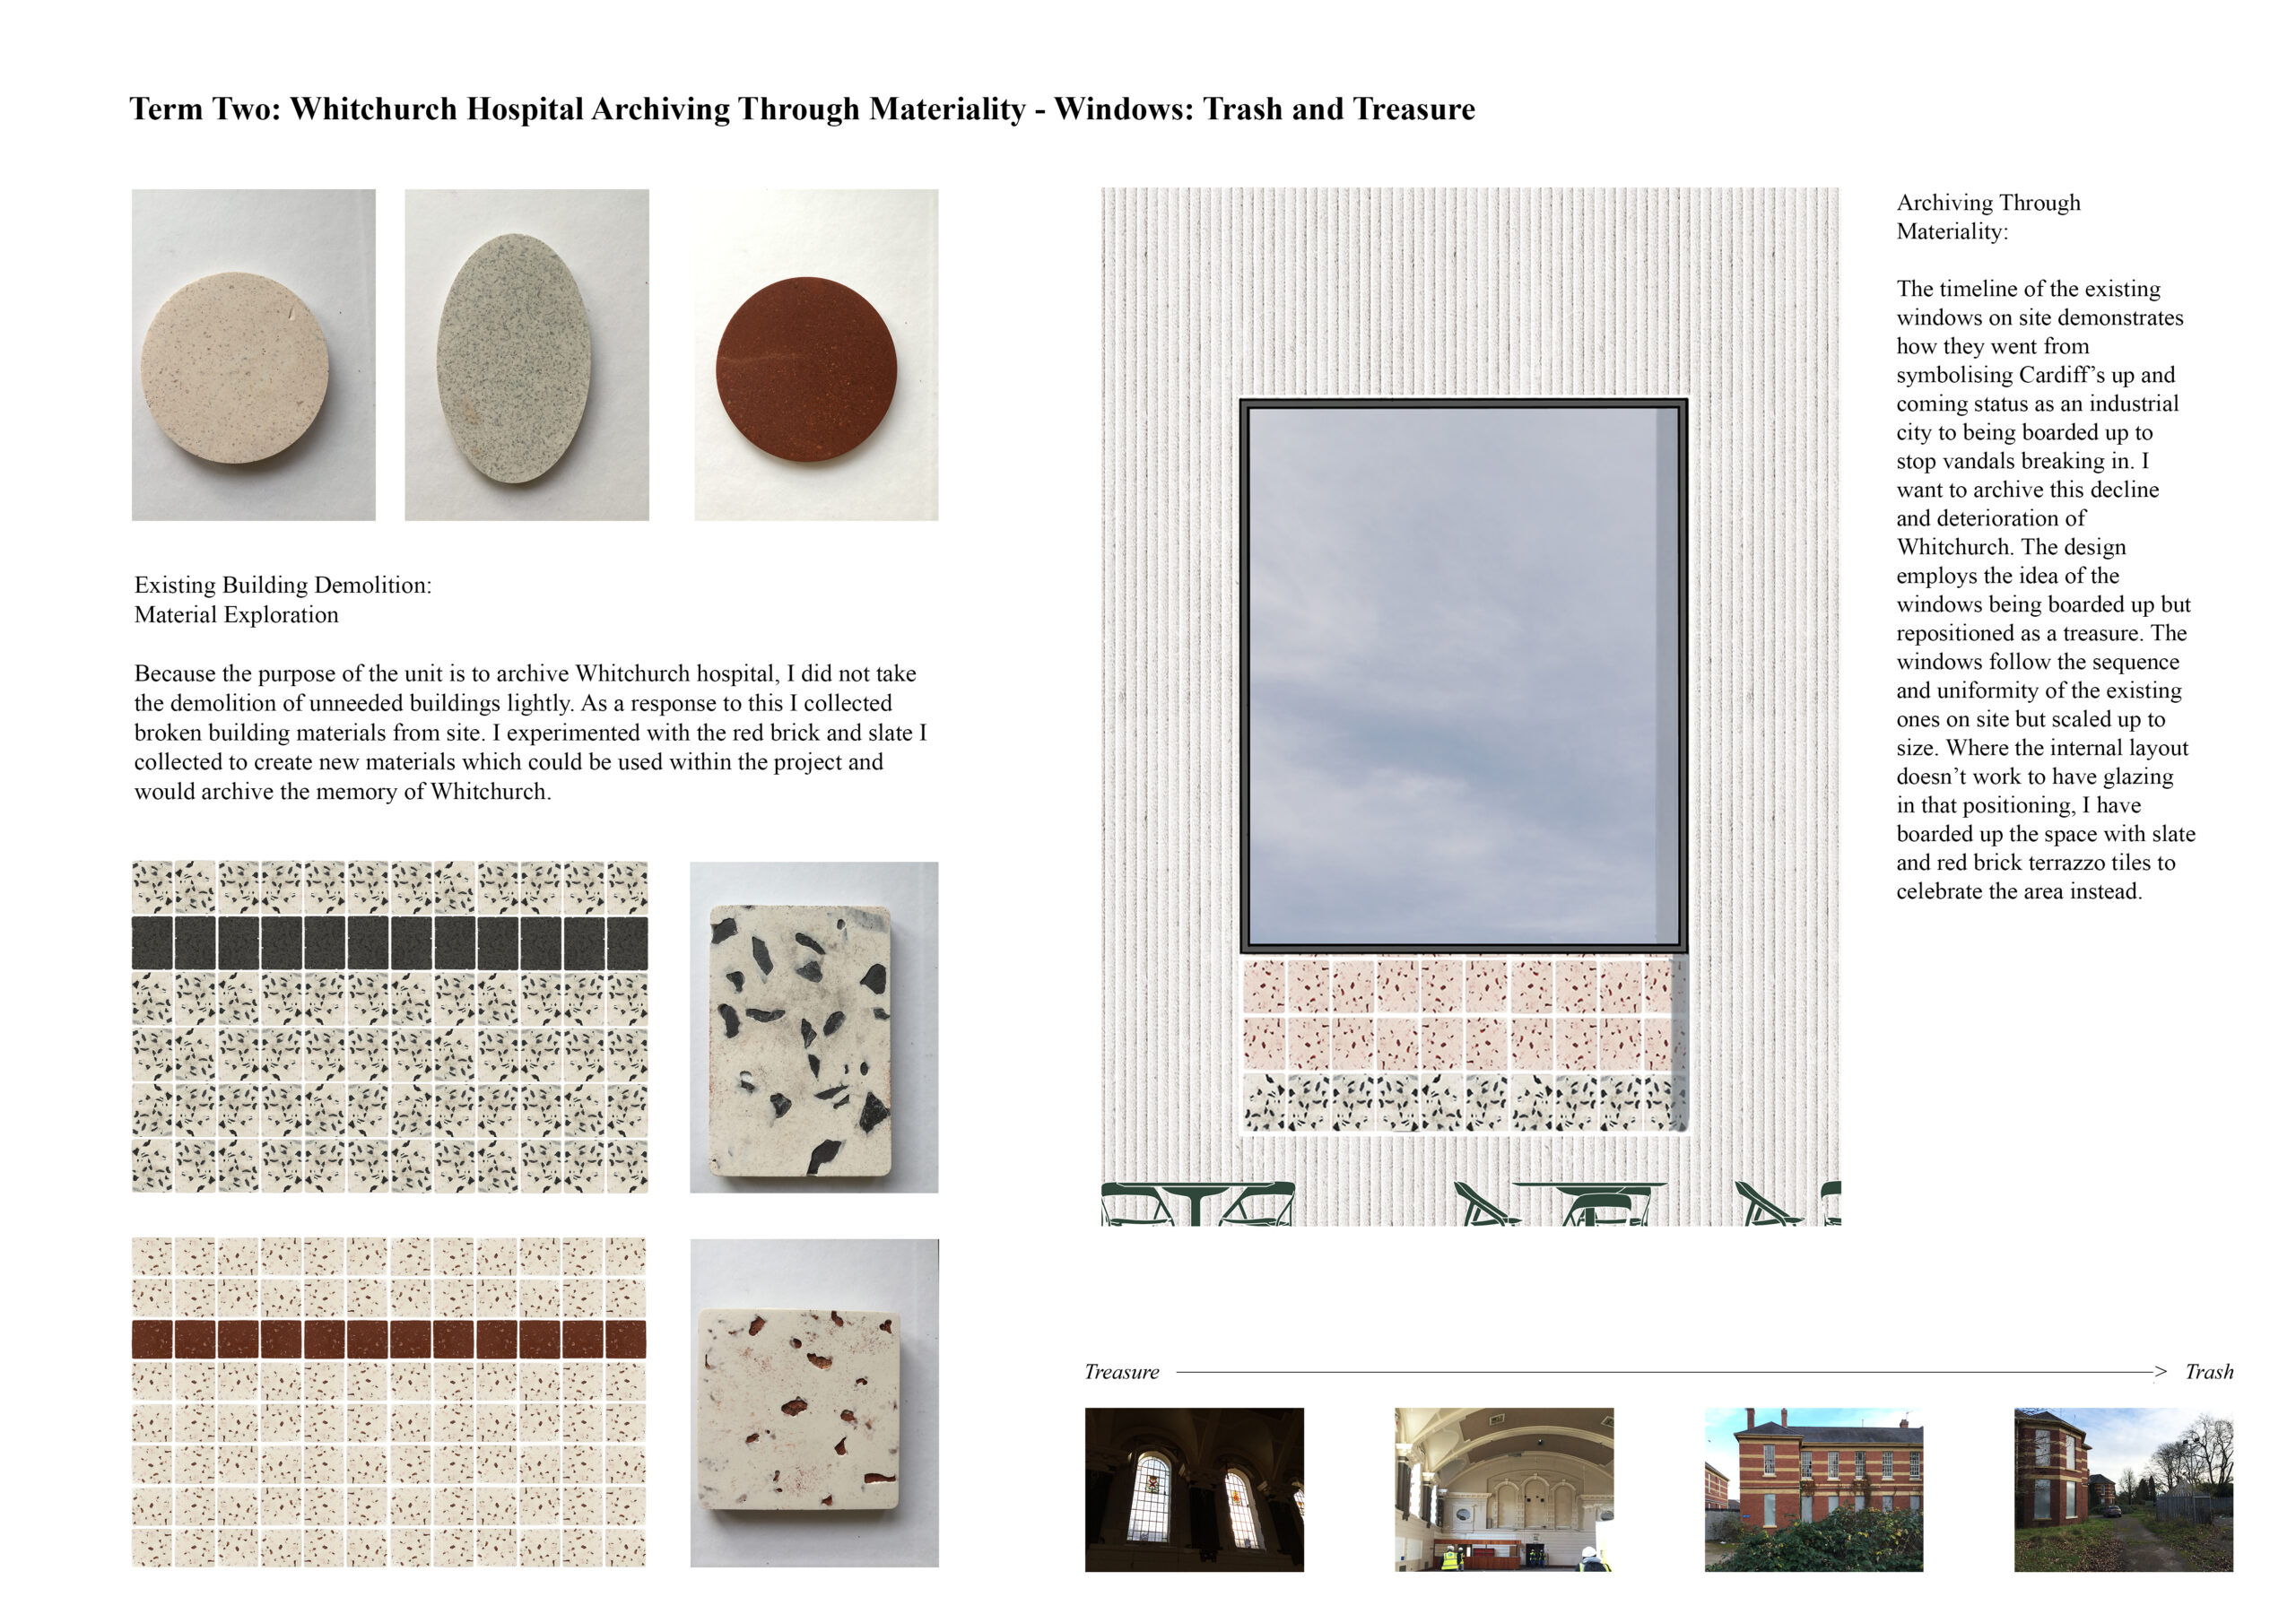 Portfolio Page exploring materiality, with photographs of new materials made from existing waste materials found at Whitchurch Hospital. A elevation of the windows shows boarded up windows being re-positioned as a treasure.